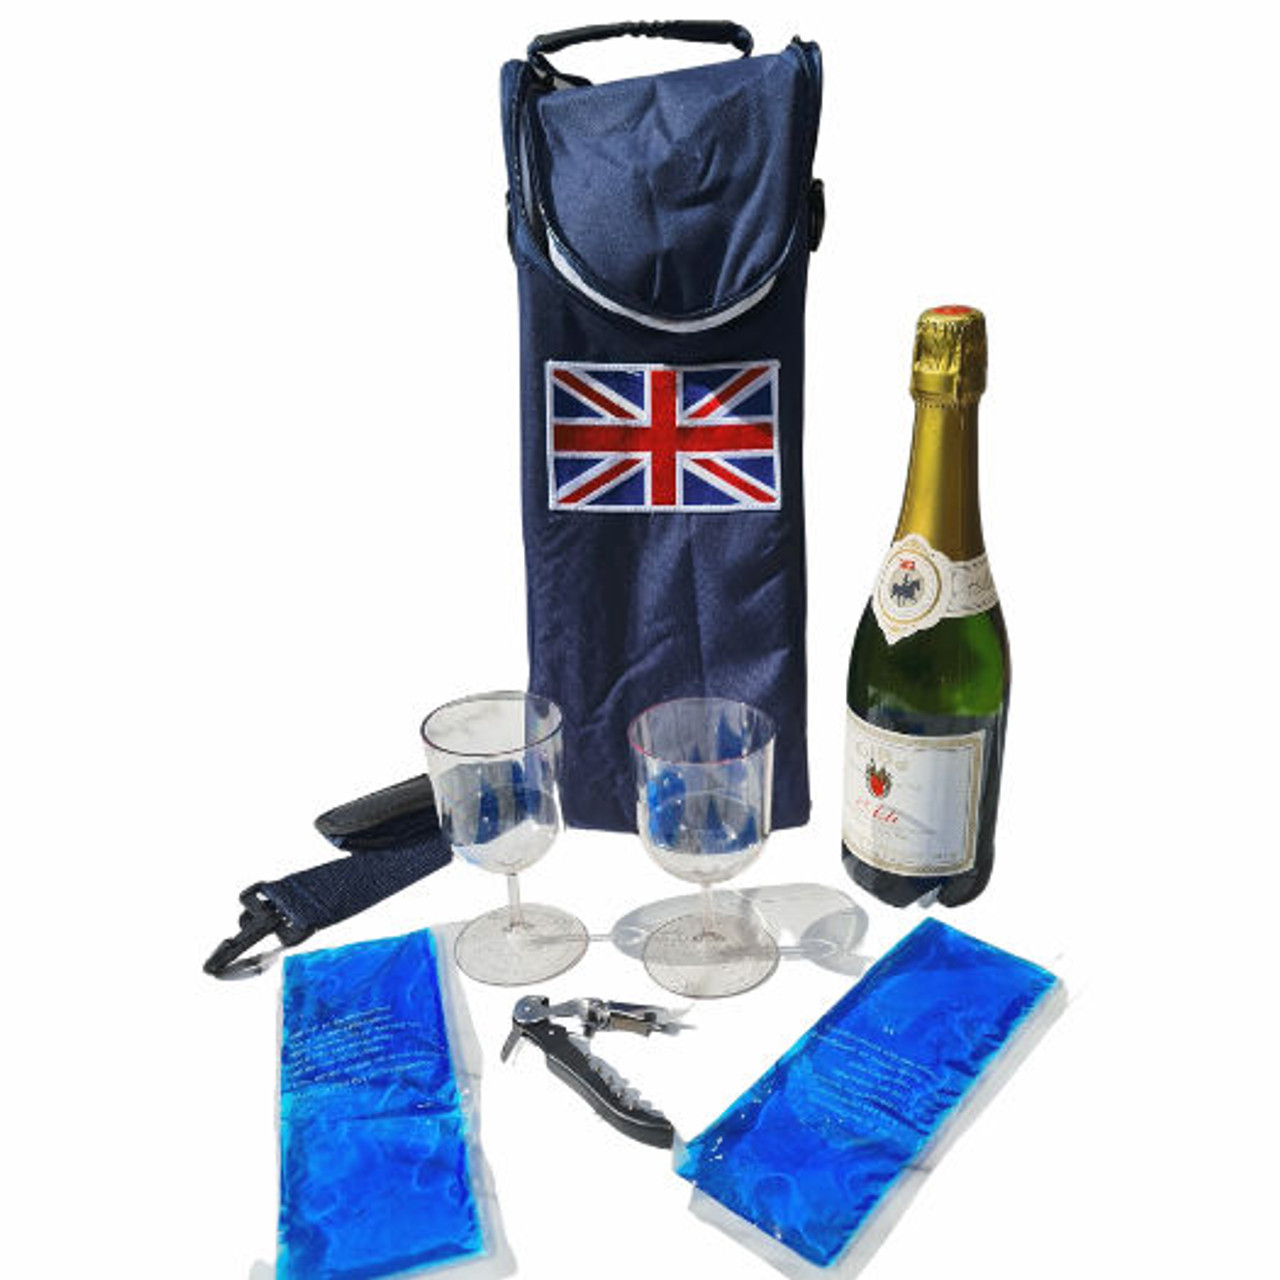 Union Jack Thermal Champagne or 2 Wine Bottle Carrier incl 2 High Quality re-usable PET Glasses, Cork Screw & 2 Freezable Pouches